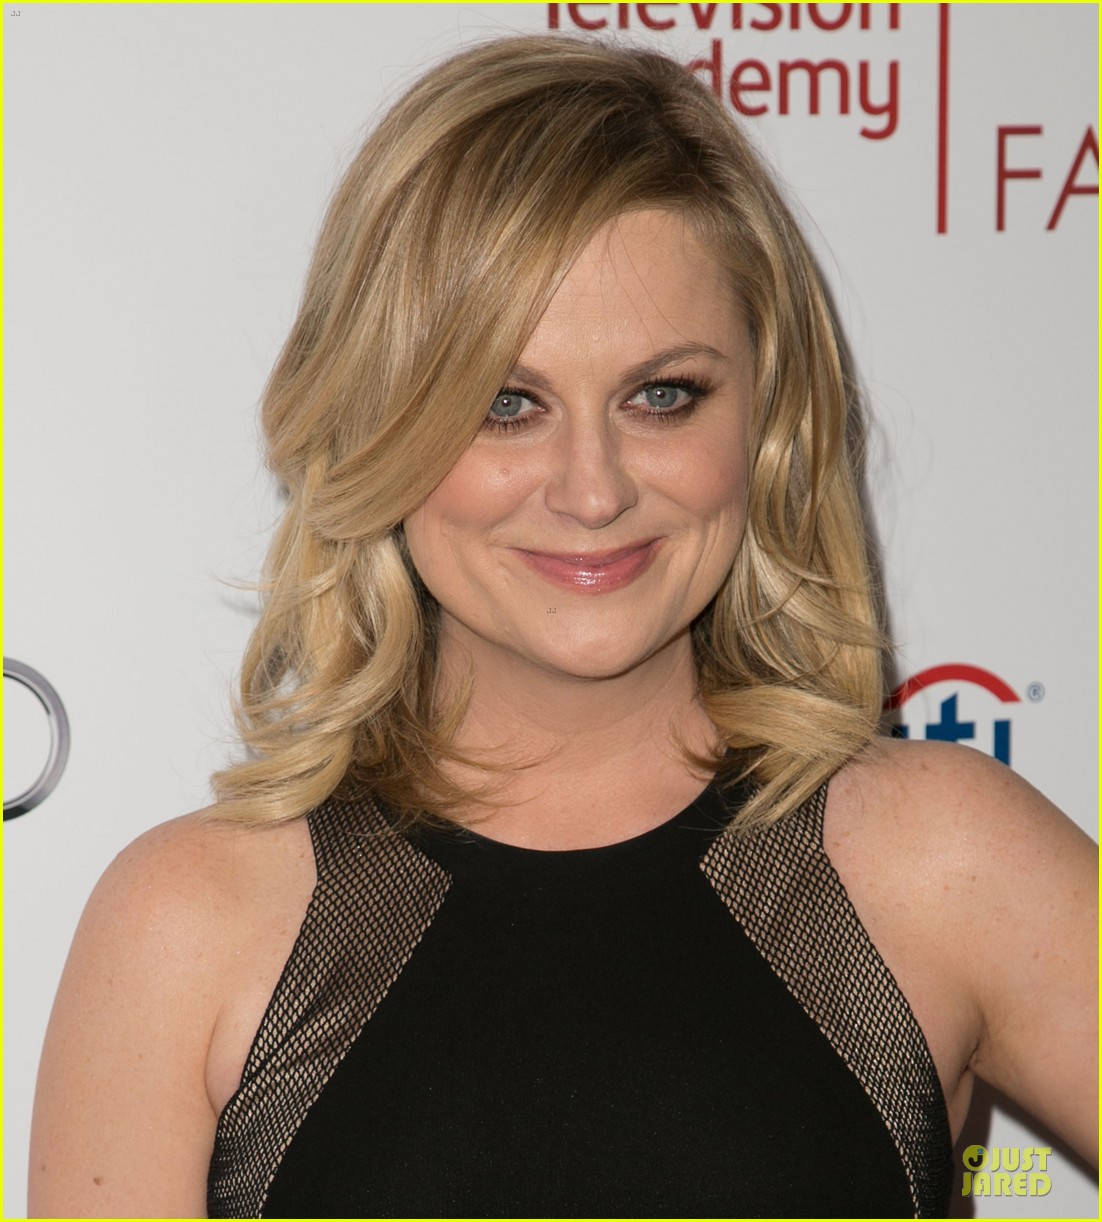 Hollywood Actress Comedian Amy Poehler Wallpaper